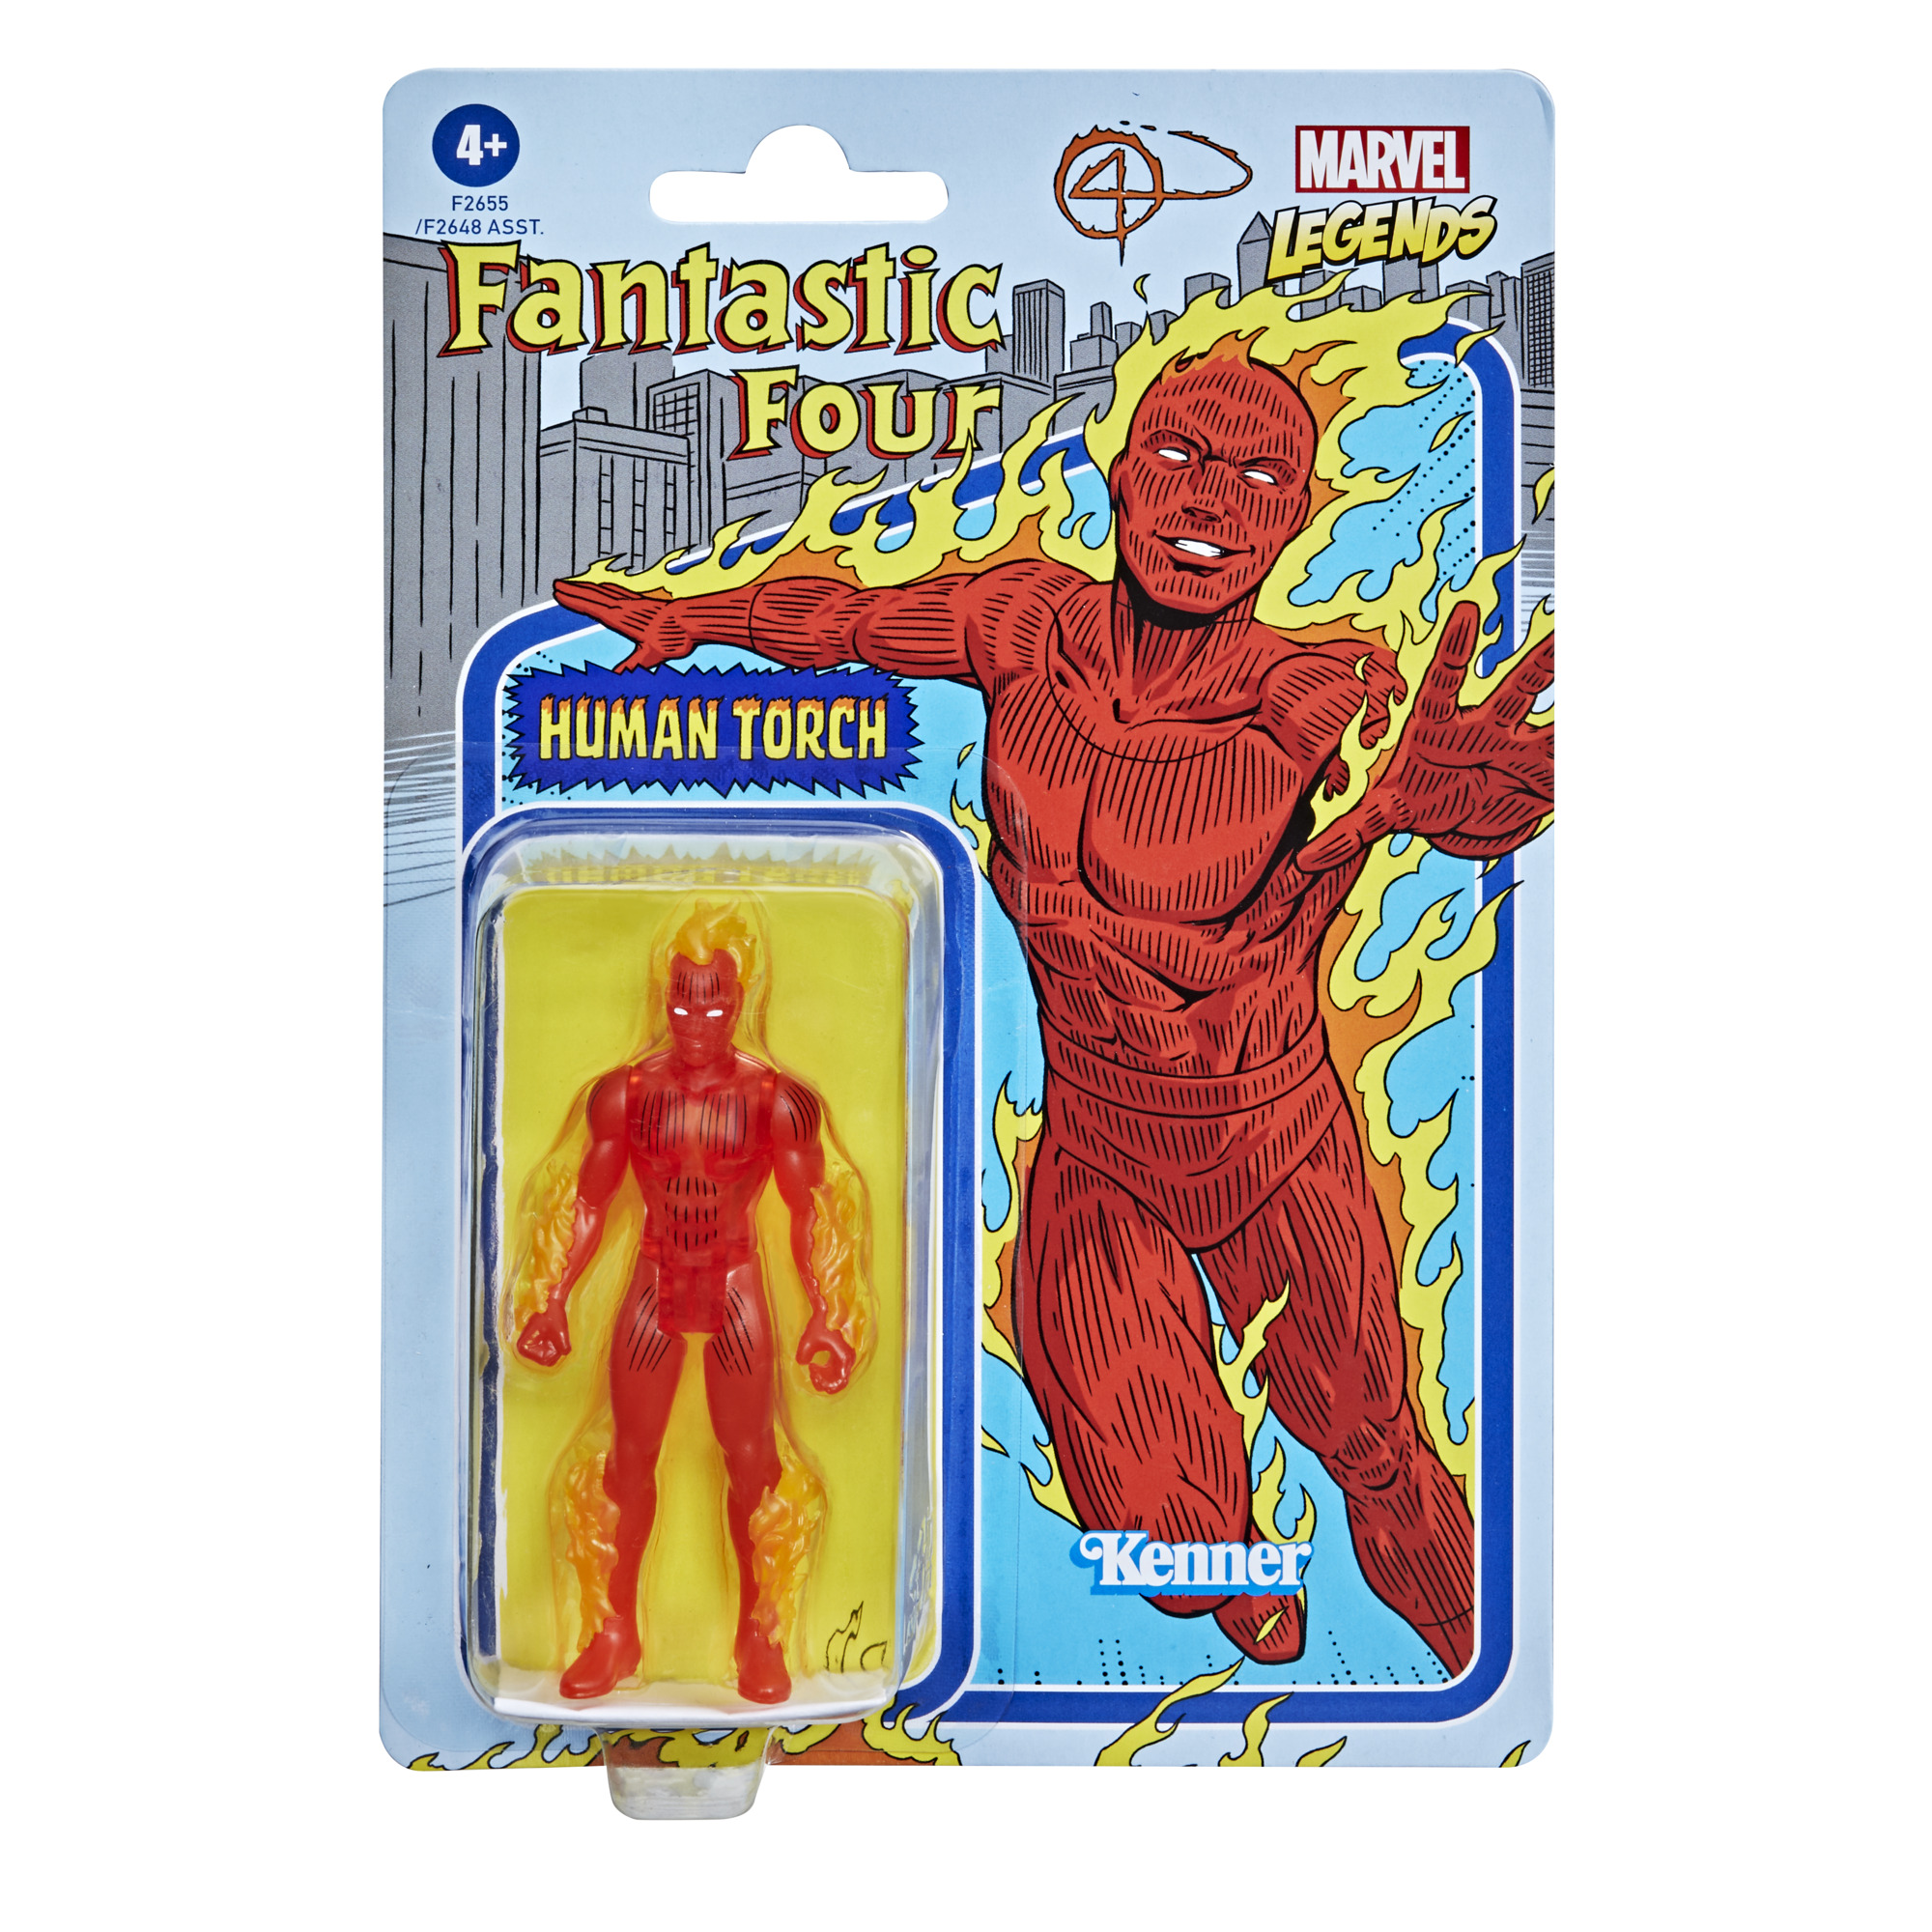 Human Torch carded